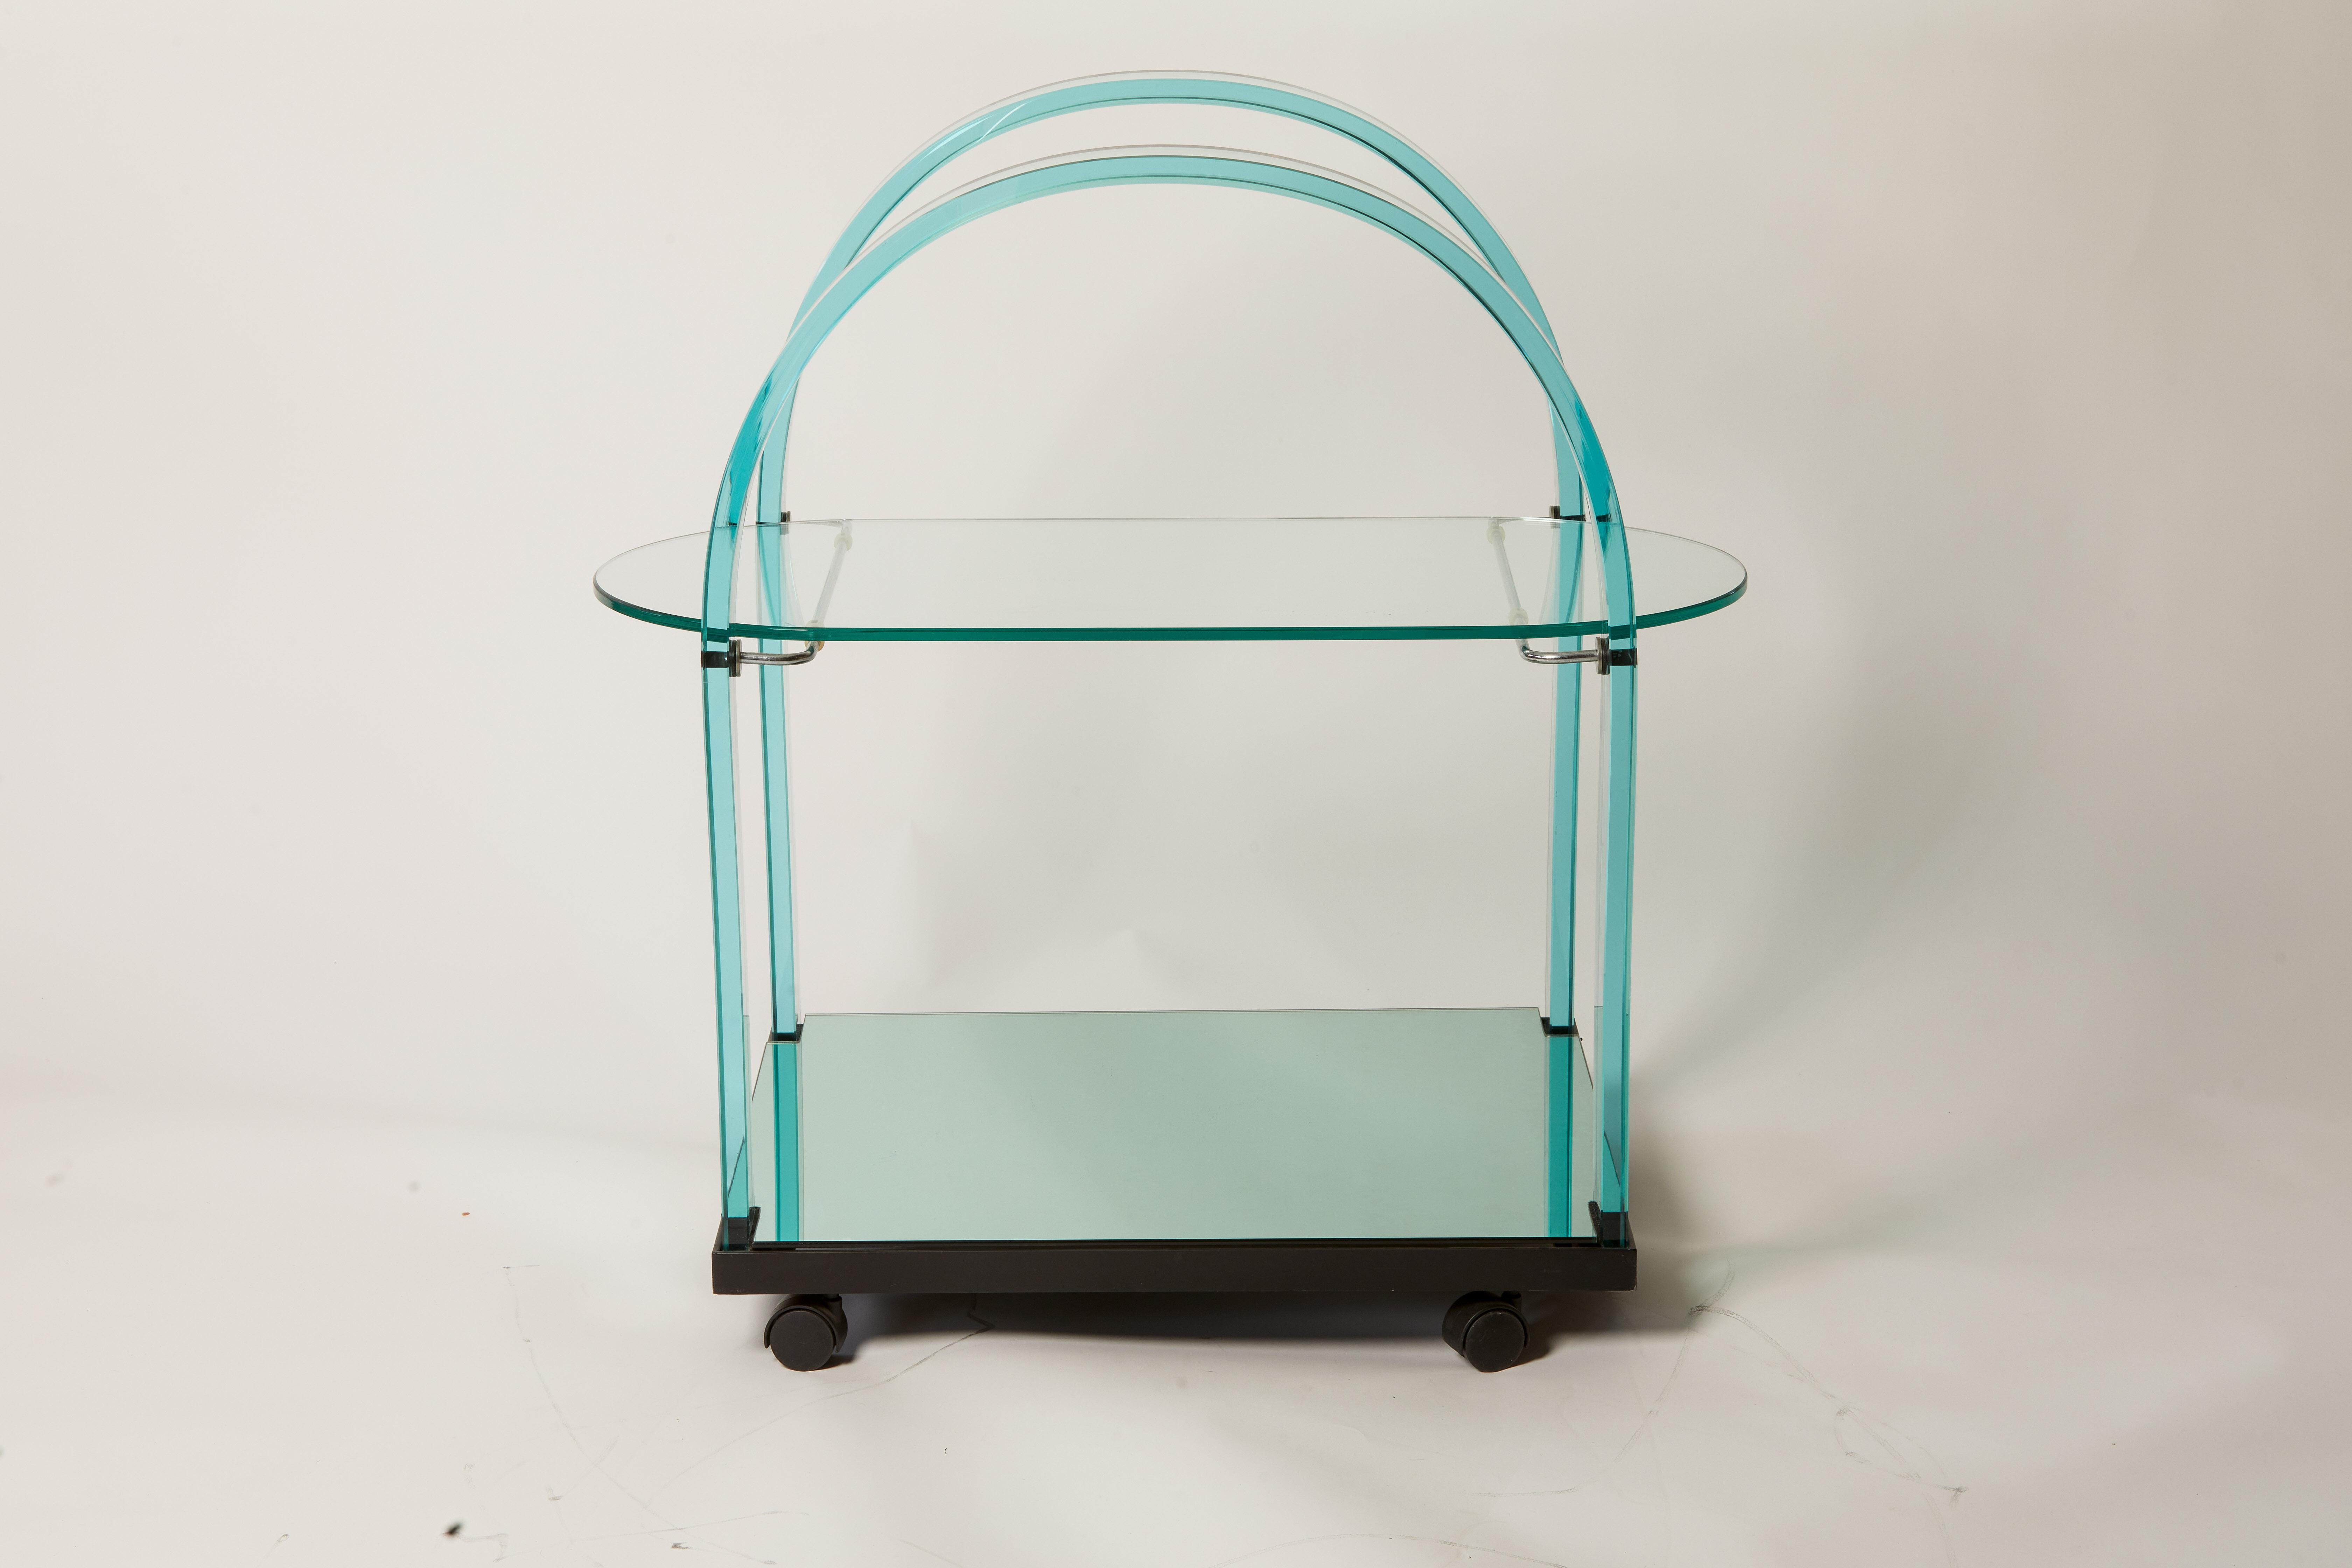 1980s French bent glass bar cart featuring mirrored shelf and metal detailing.